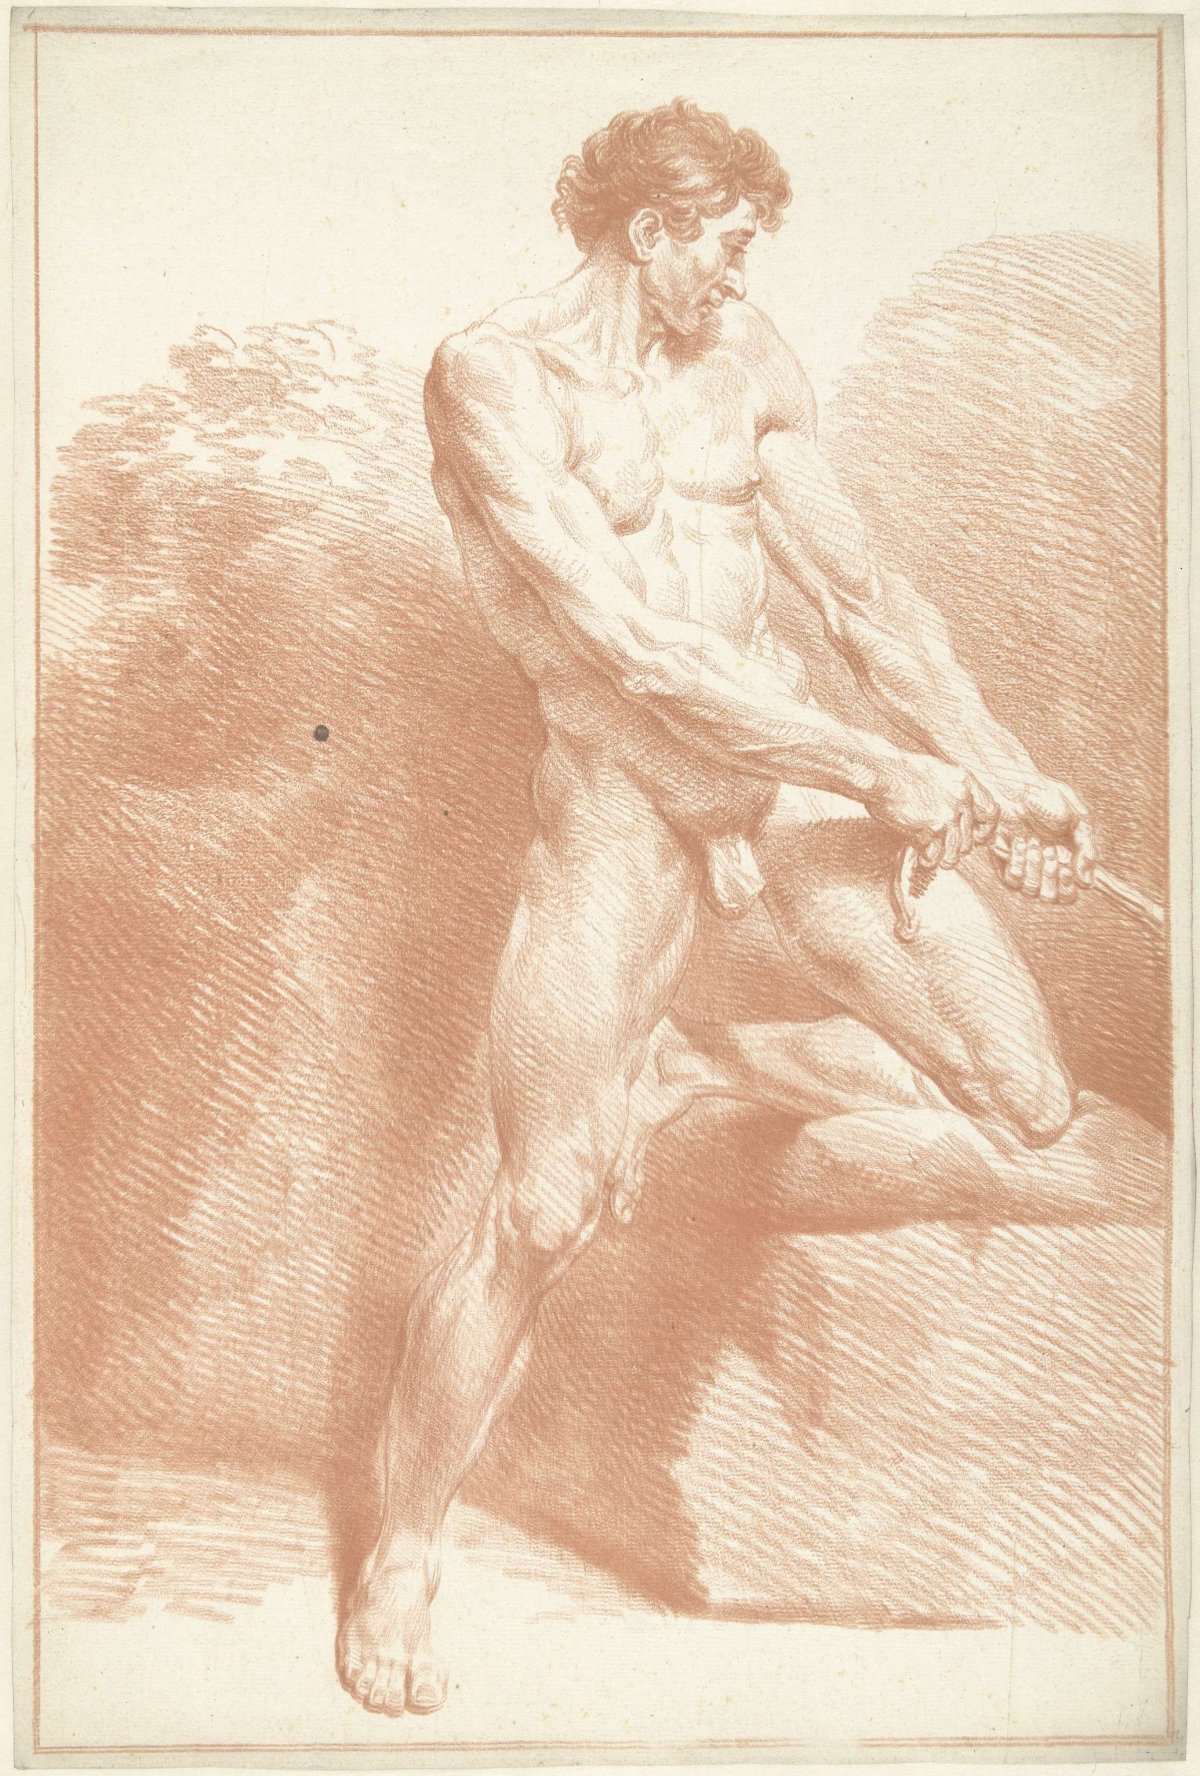 Male nude, standing, pulling a rope, Louis Fabritius Dubourg, 1703 - 1775